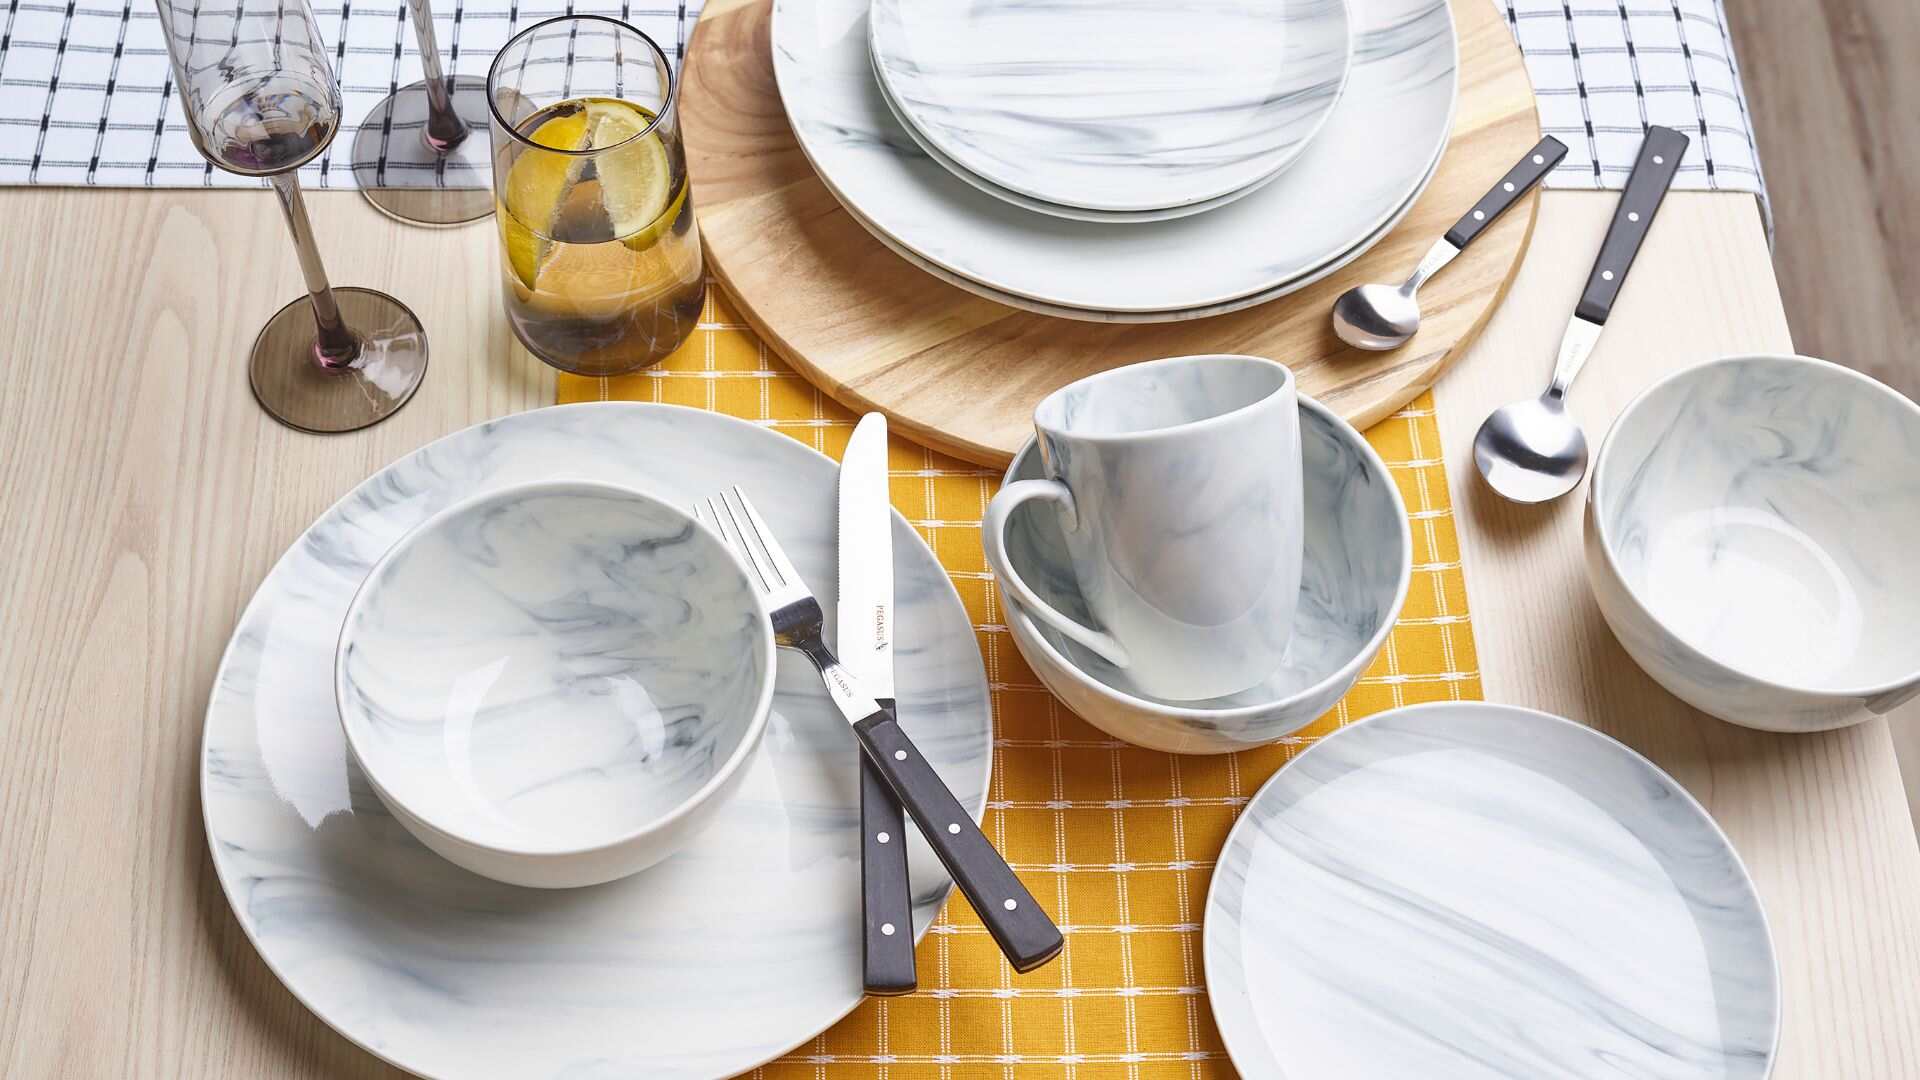 Popular Bowl And Plate Set Materials